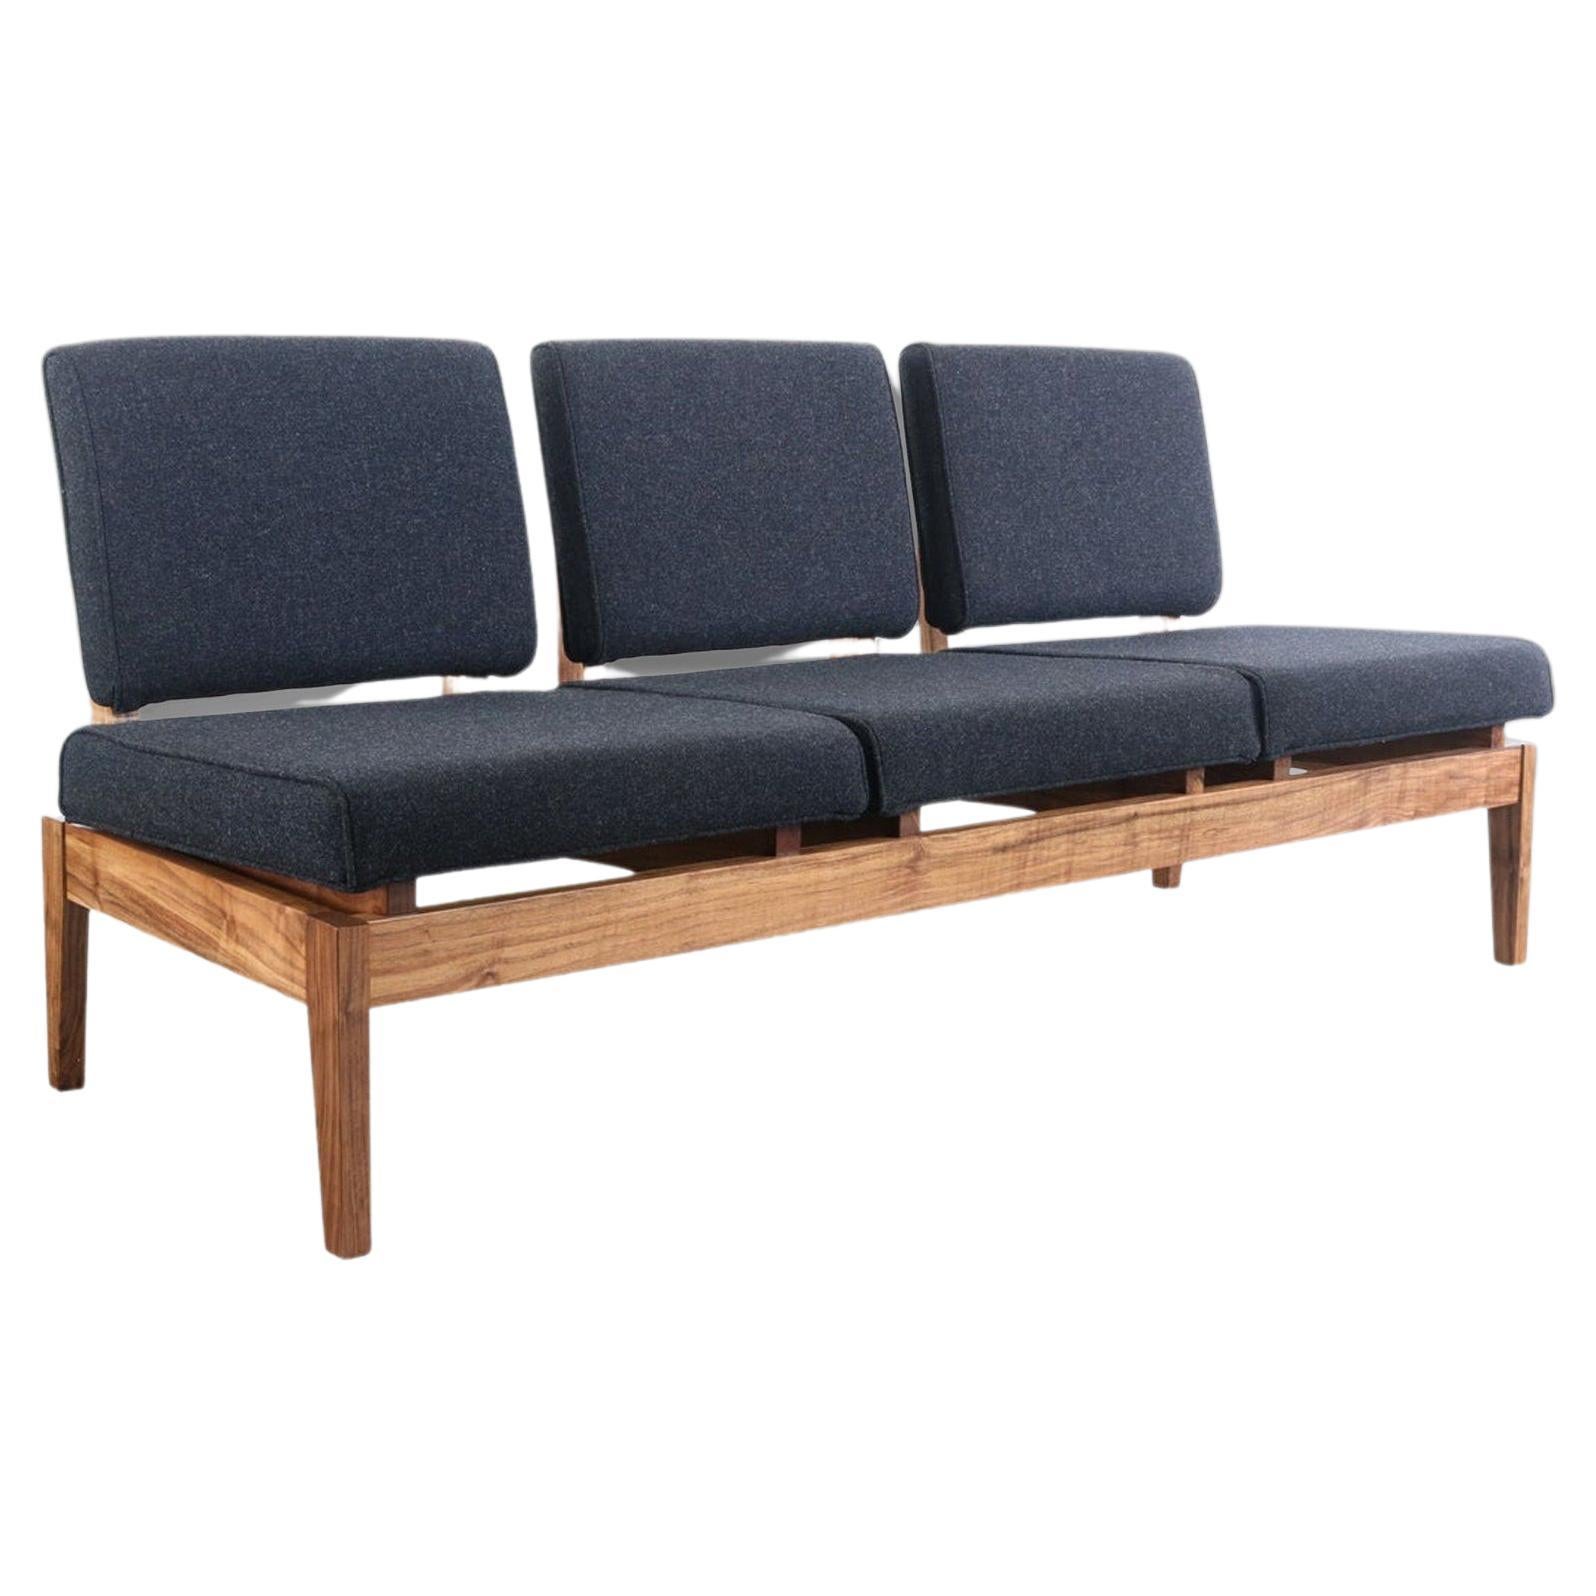 3 Seat Sofa in Solid Walnut Styled After Jens Risom for Risoms Designs Inc., USA